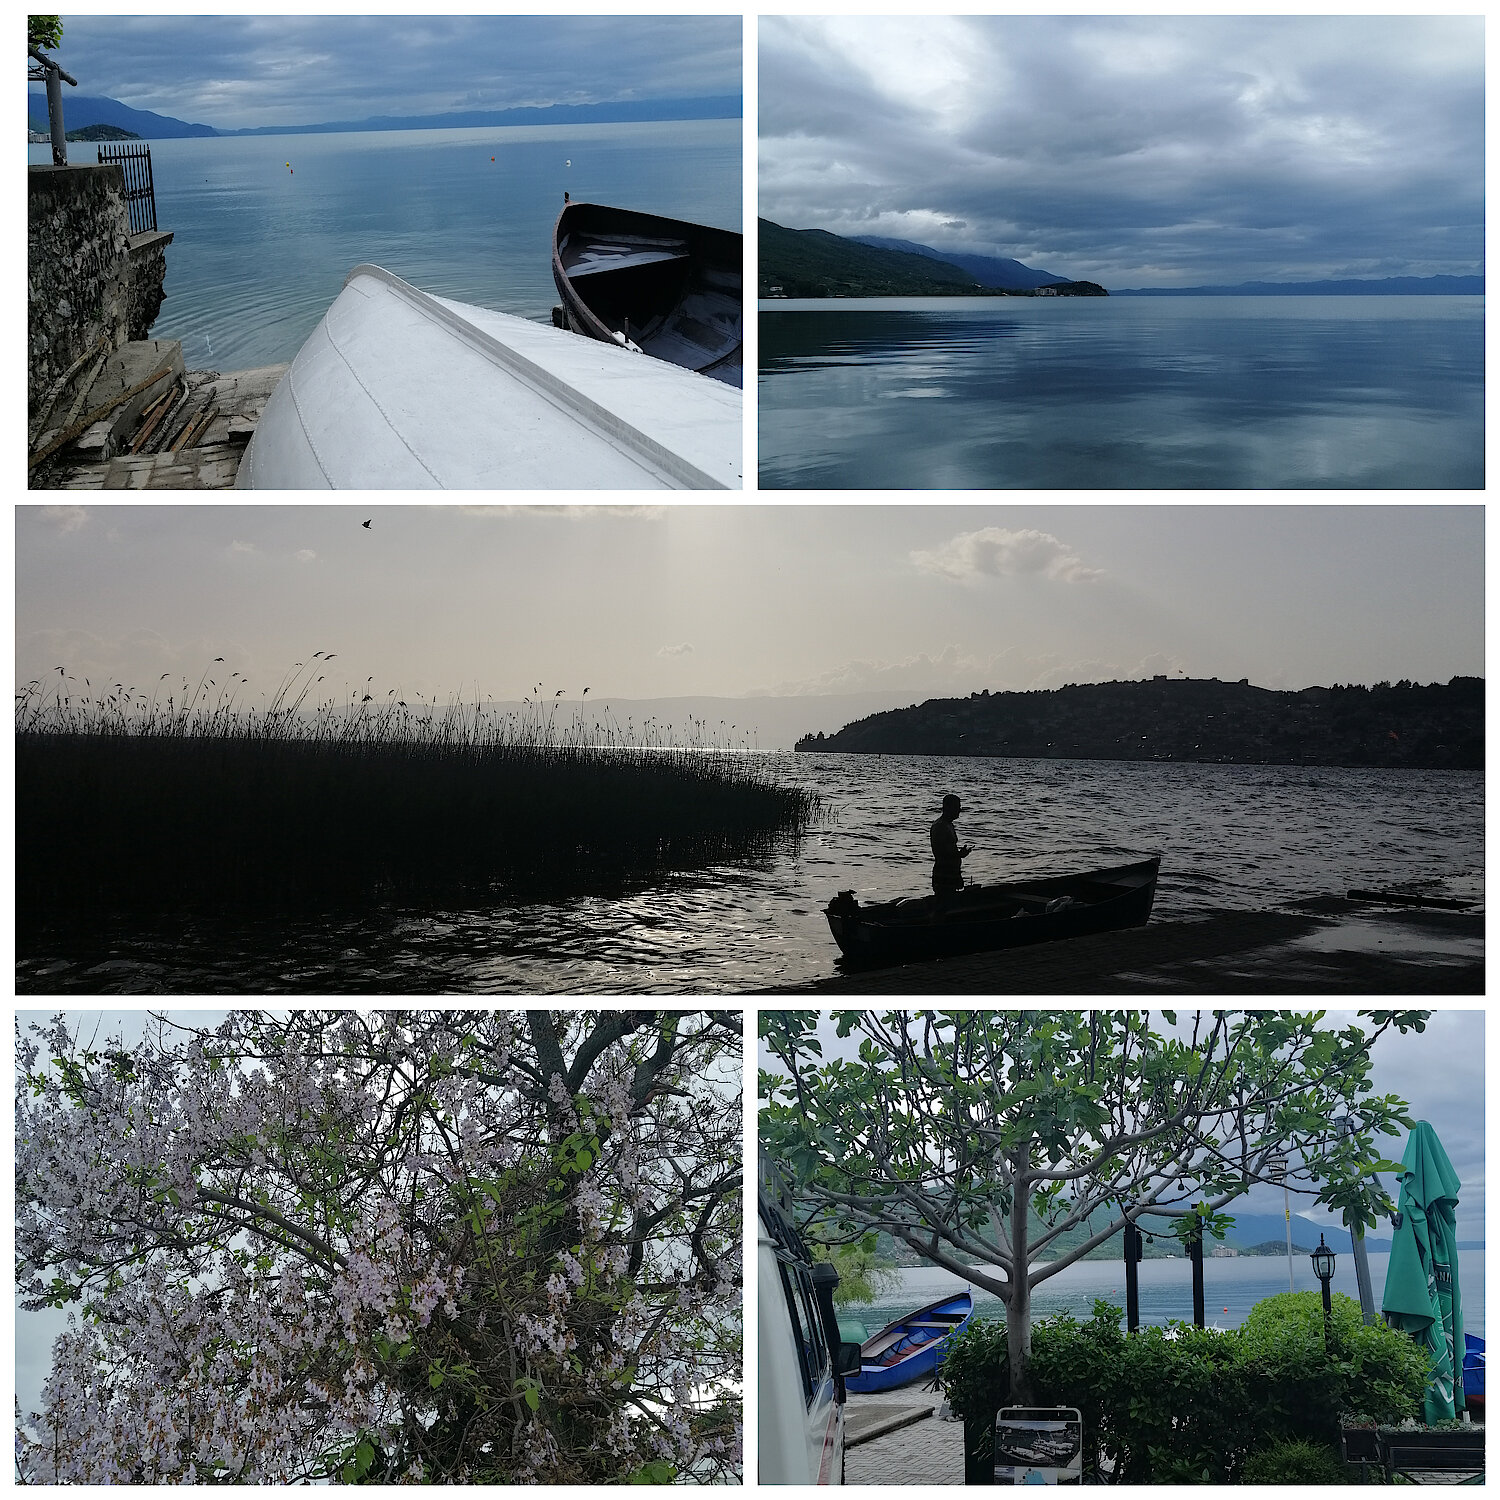 Different pictures of North Macedonia showing the sea side and nature